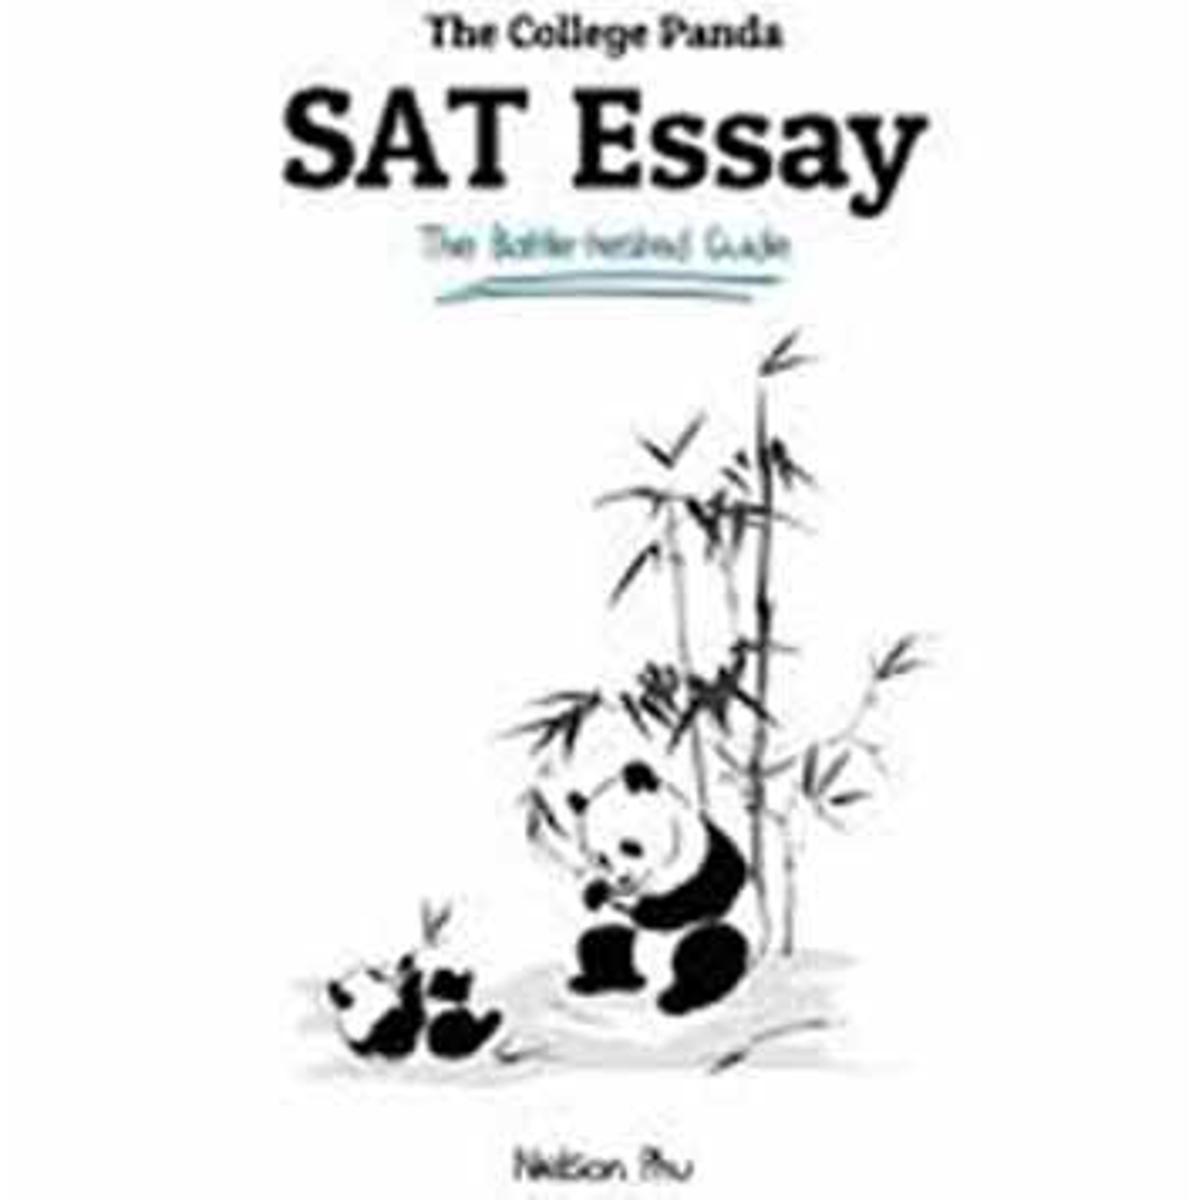 The College Panda's SAT Essay The Battle-tested Guide